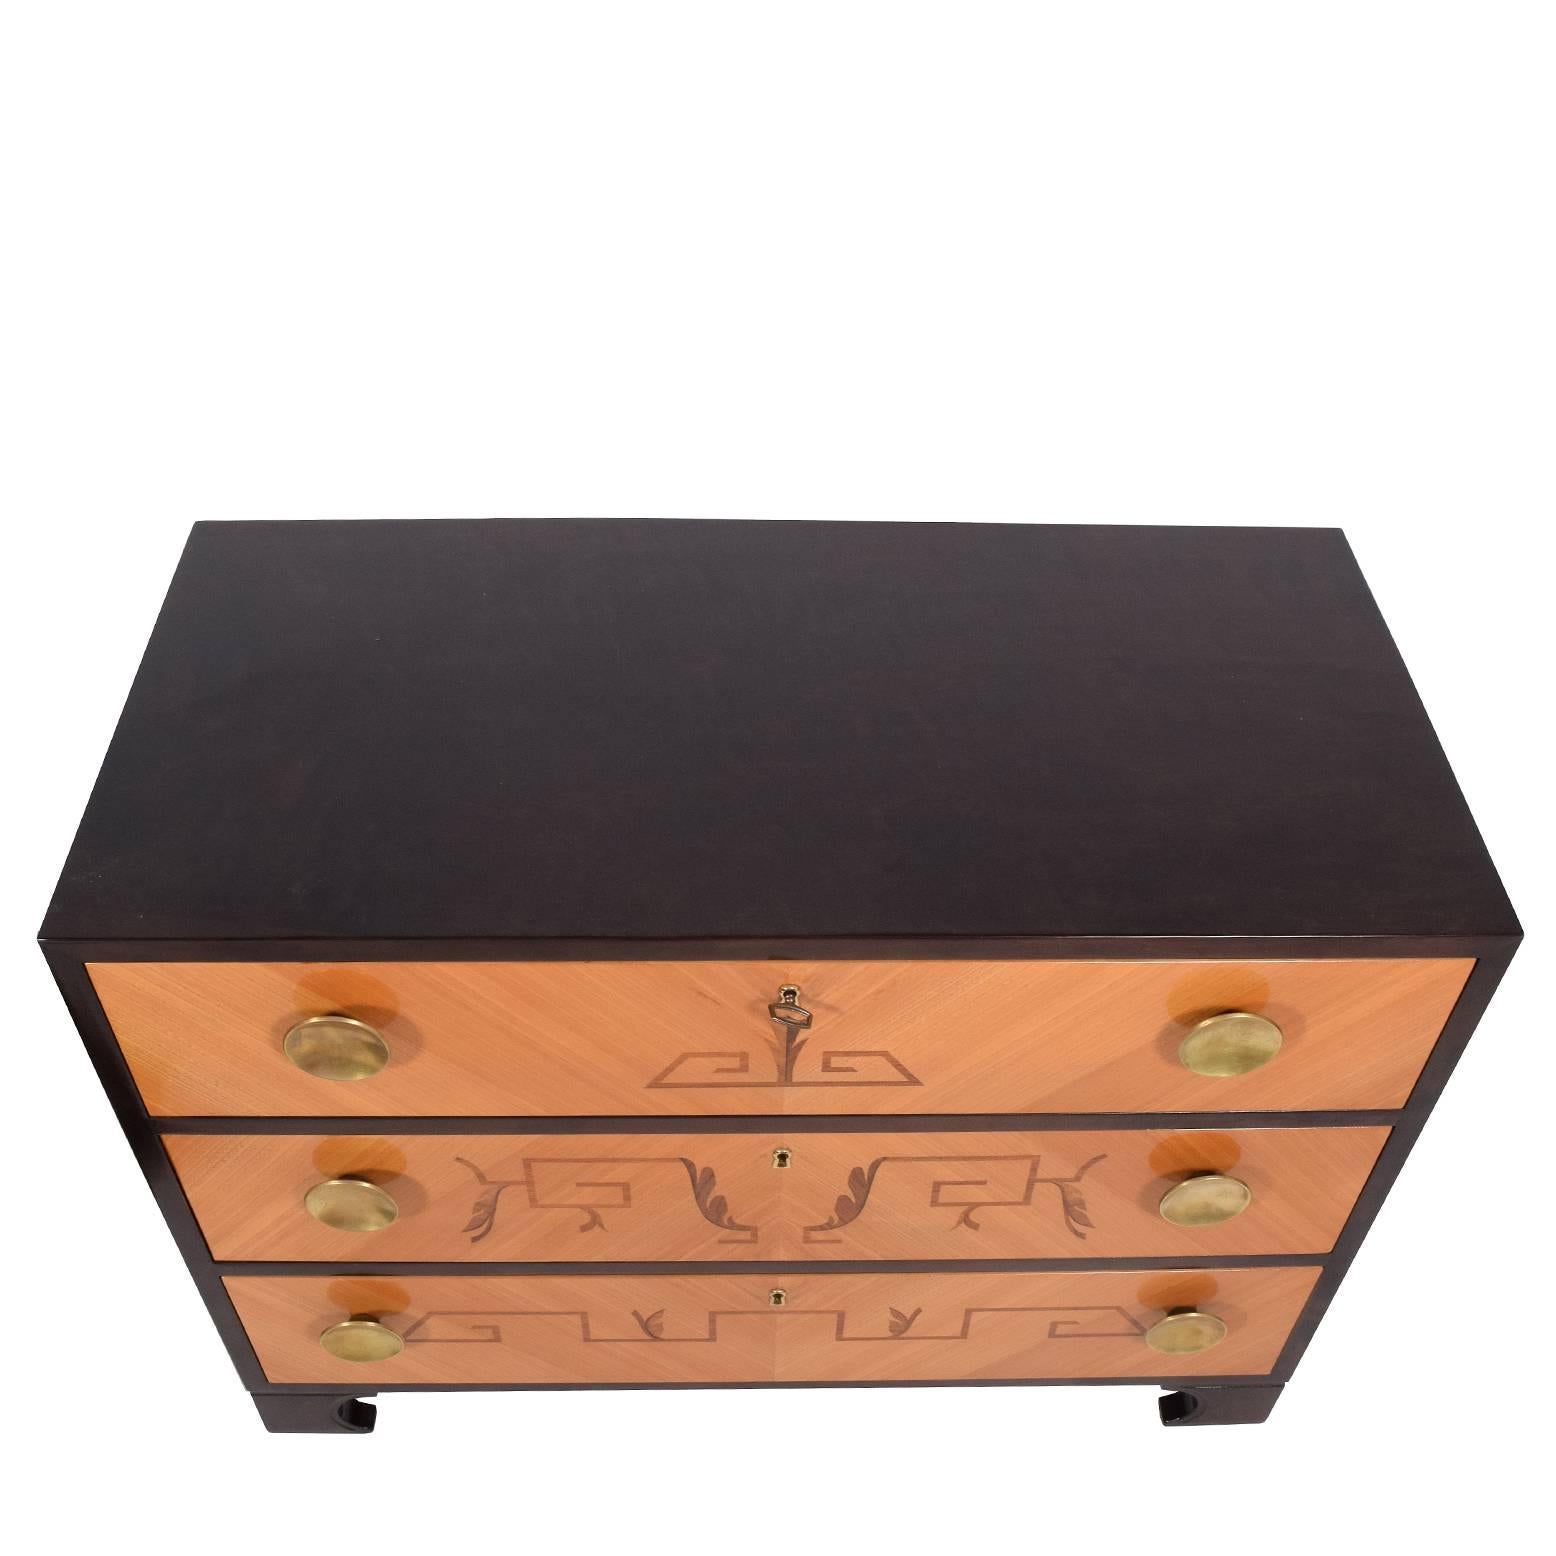 Features three drawers with Art Deco inlay designs and solid brass pulls.